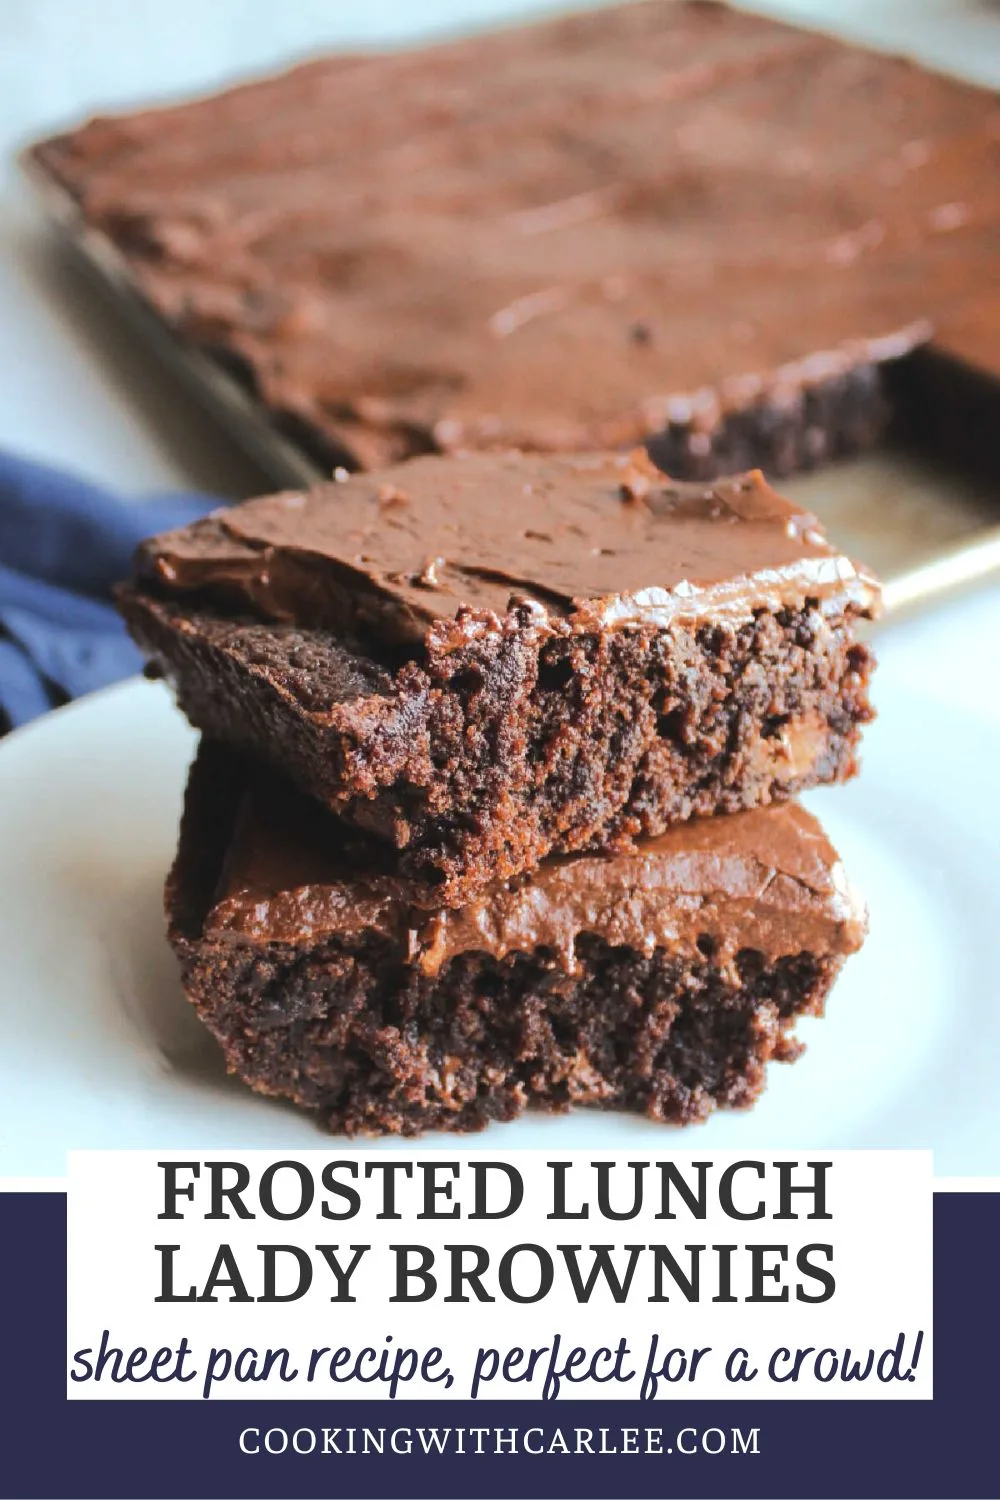 Make a giant sheet pan filled with frosted lunch lady brownies for a chocolaty treat big enough to feed a crowd. They are easy to make the chocolate icing takes them to the next level of delicious.